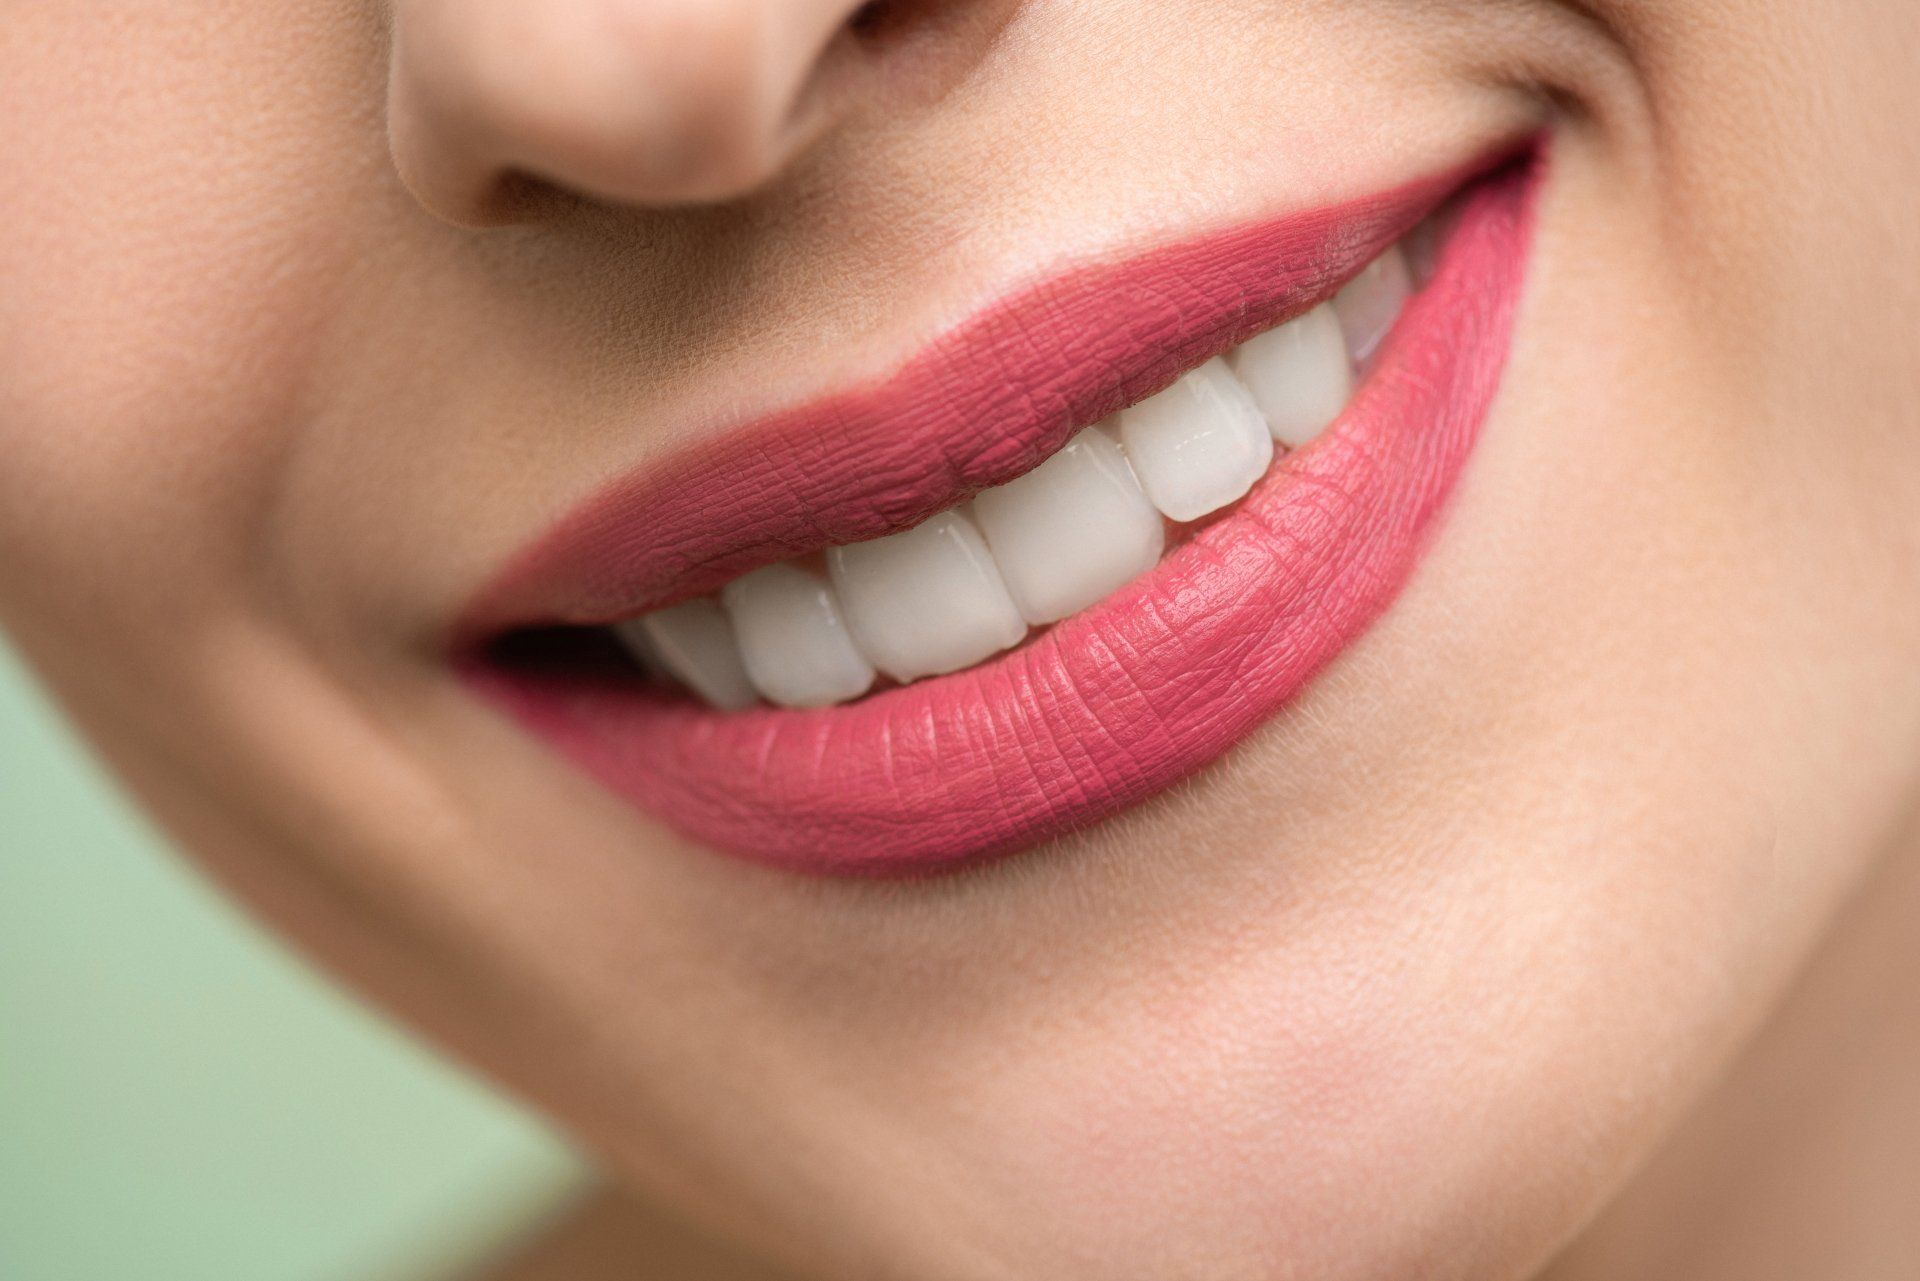 A close up of a woman 's smile with white teeth and pink lipstick.